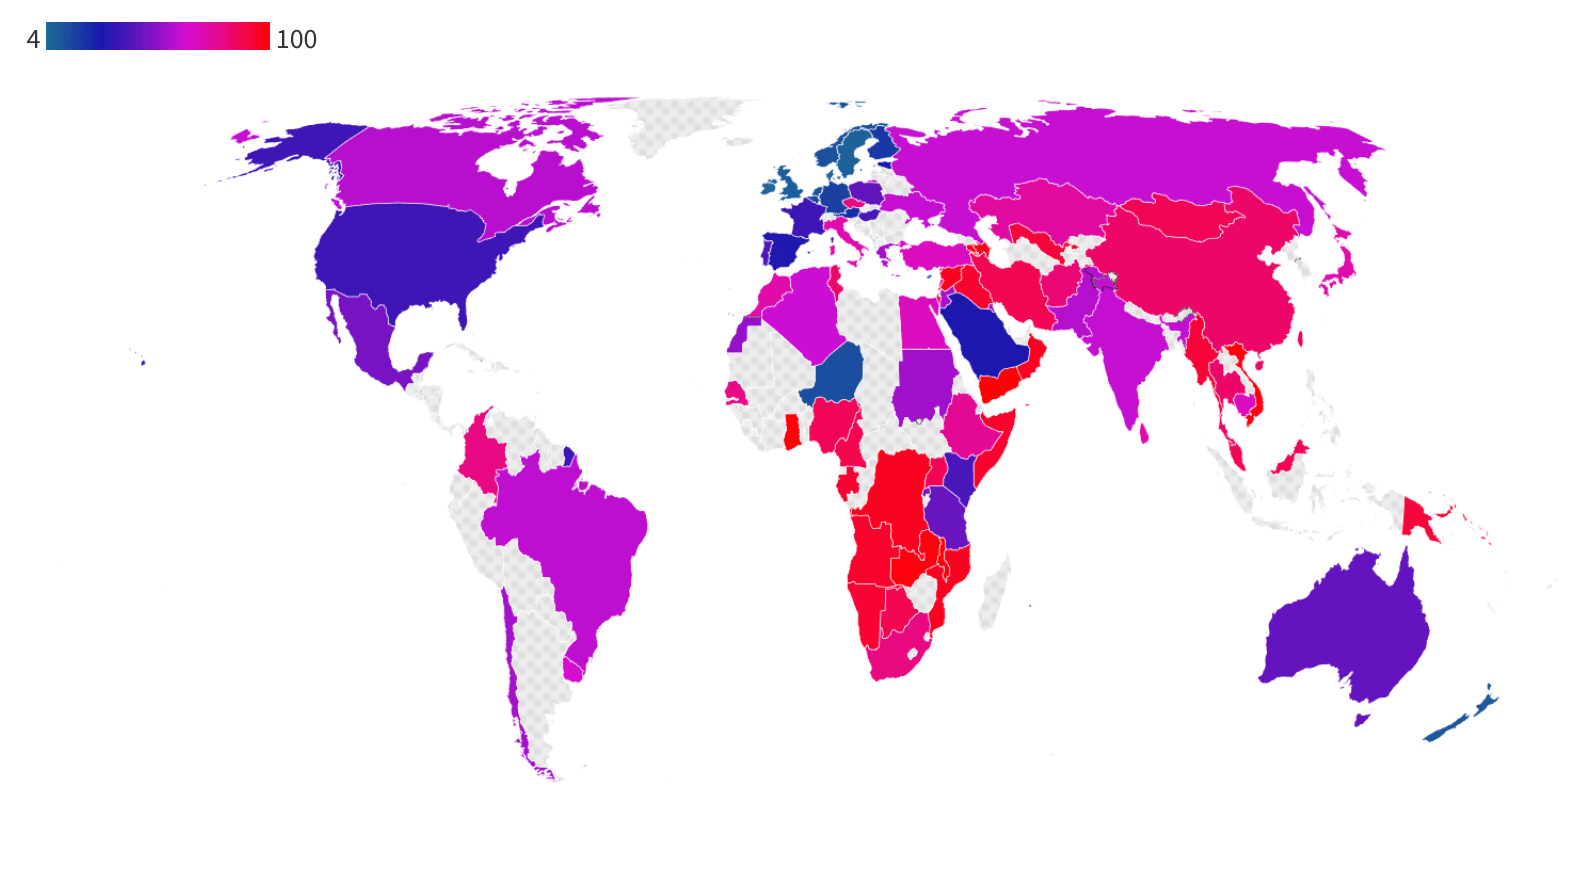 Country map showing lactose intolerance by countries from blue to red showing most countries in shades of purple or red